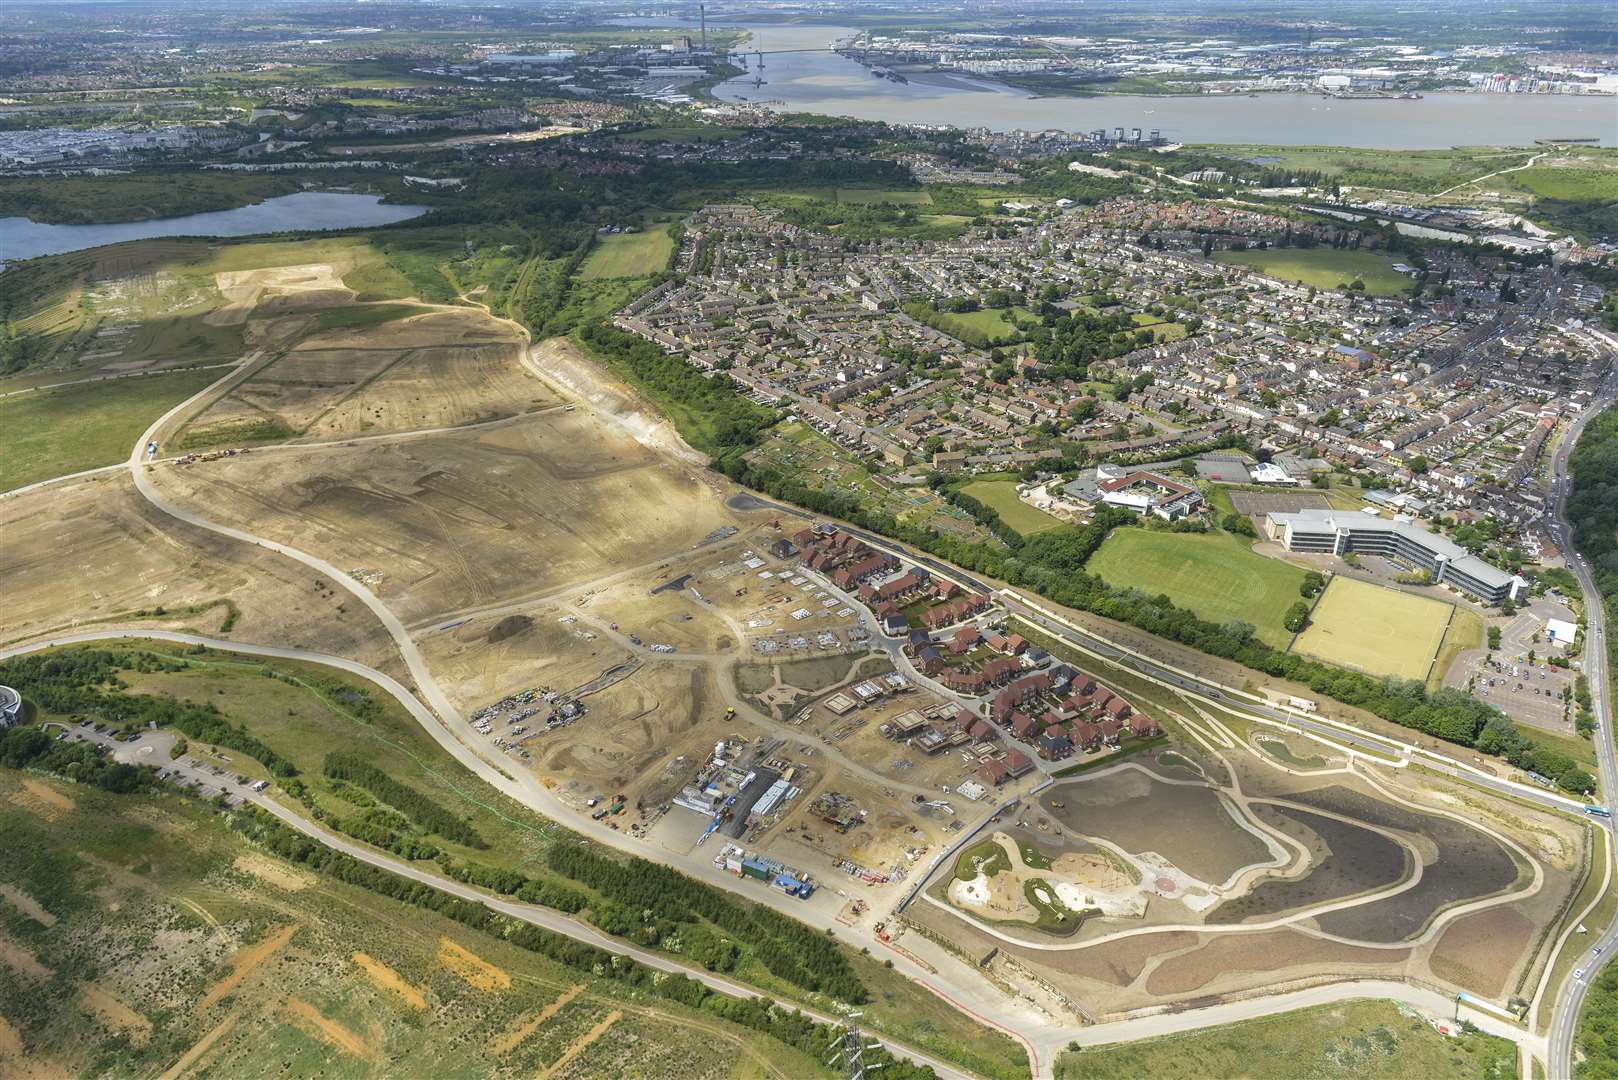 Thousands of homes are being built at Ebbsfleet Garden City, which has high speed rail links into London